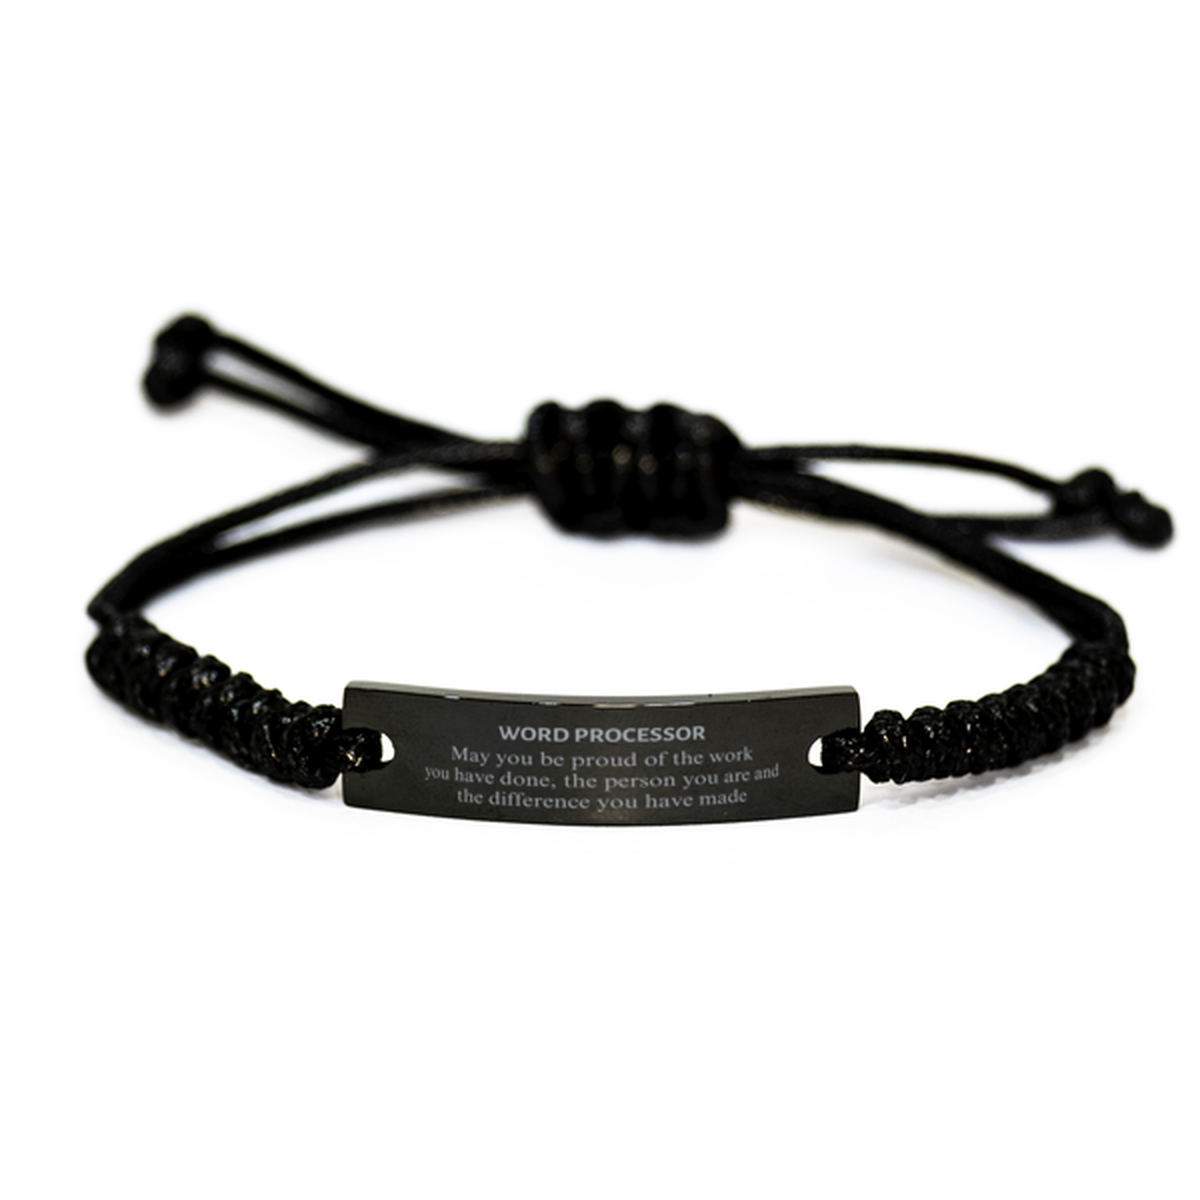 Word Processor May you be proud of the work you have done, Retirement Word Processor Black Rope Bracelet for Colleague Appreciation Gifts Amazing for Word Processor